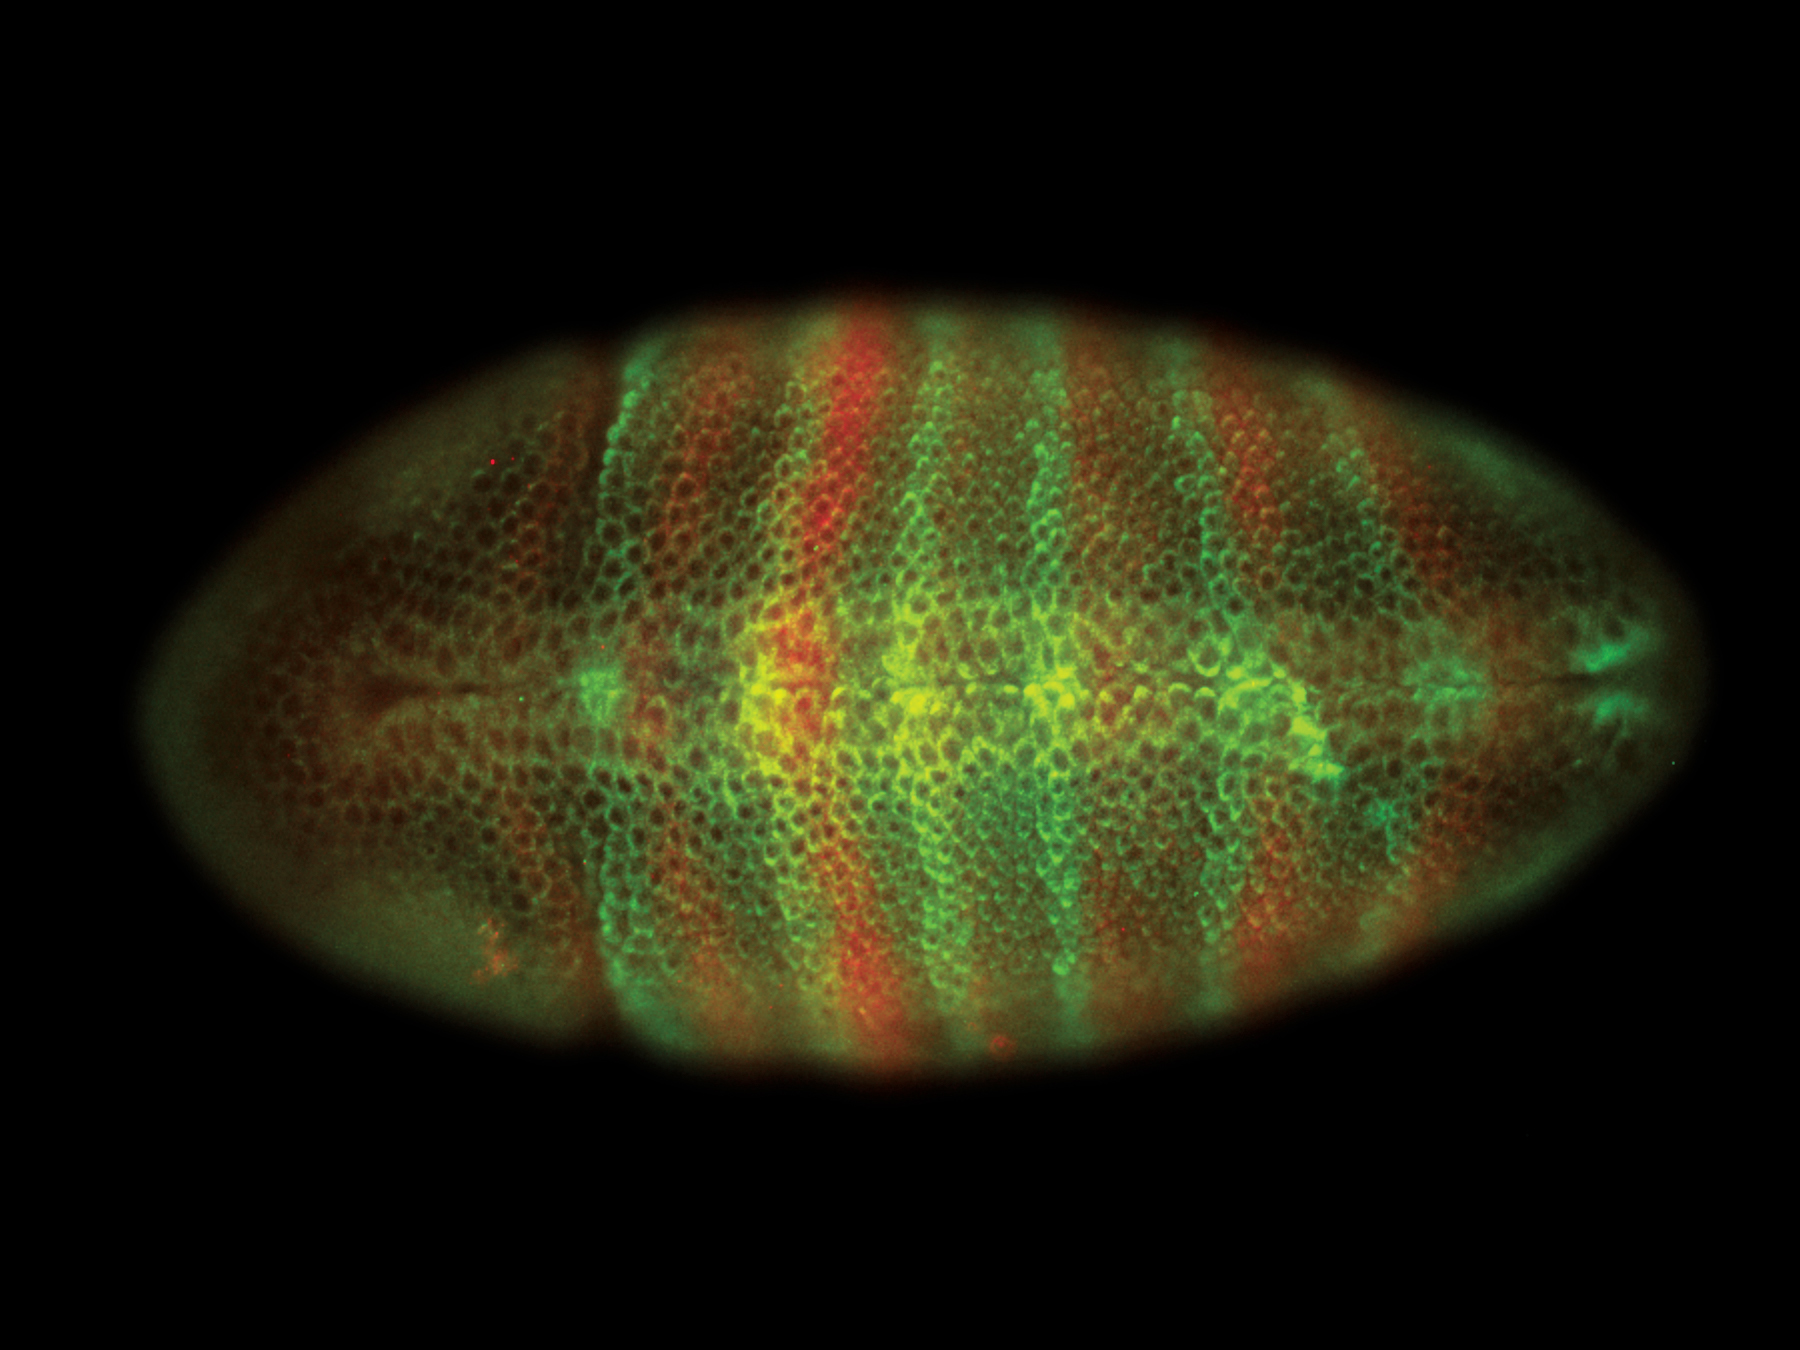 A microscopy image of an insect embryo, which looks something like a fluorescent green and orange grain of rice.